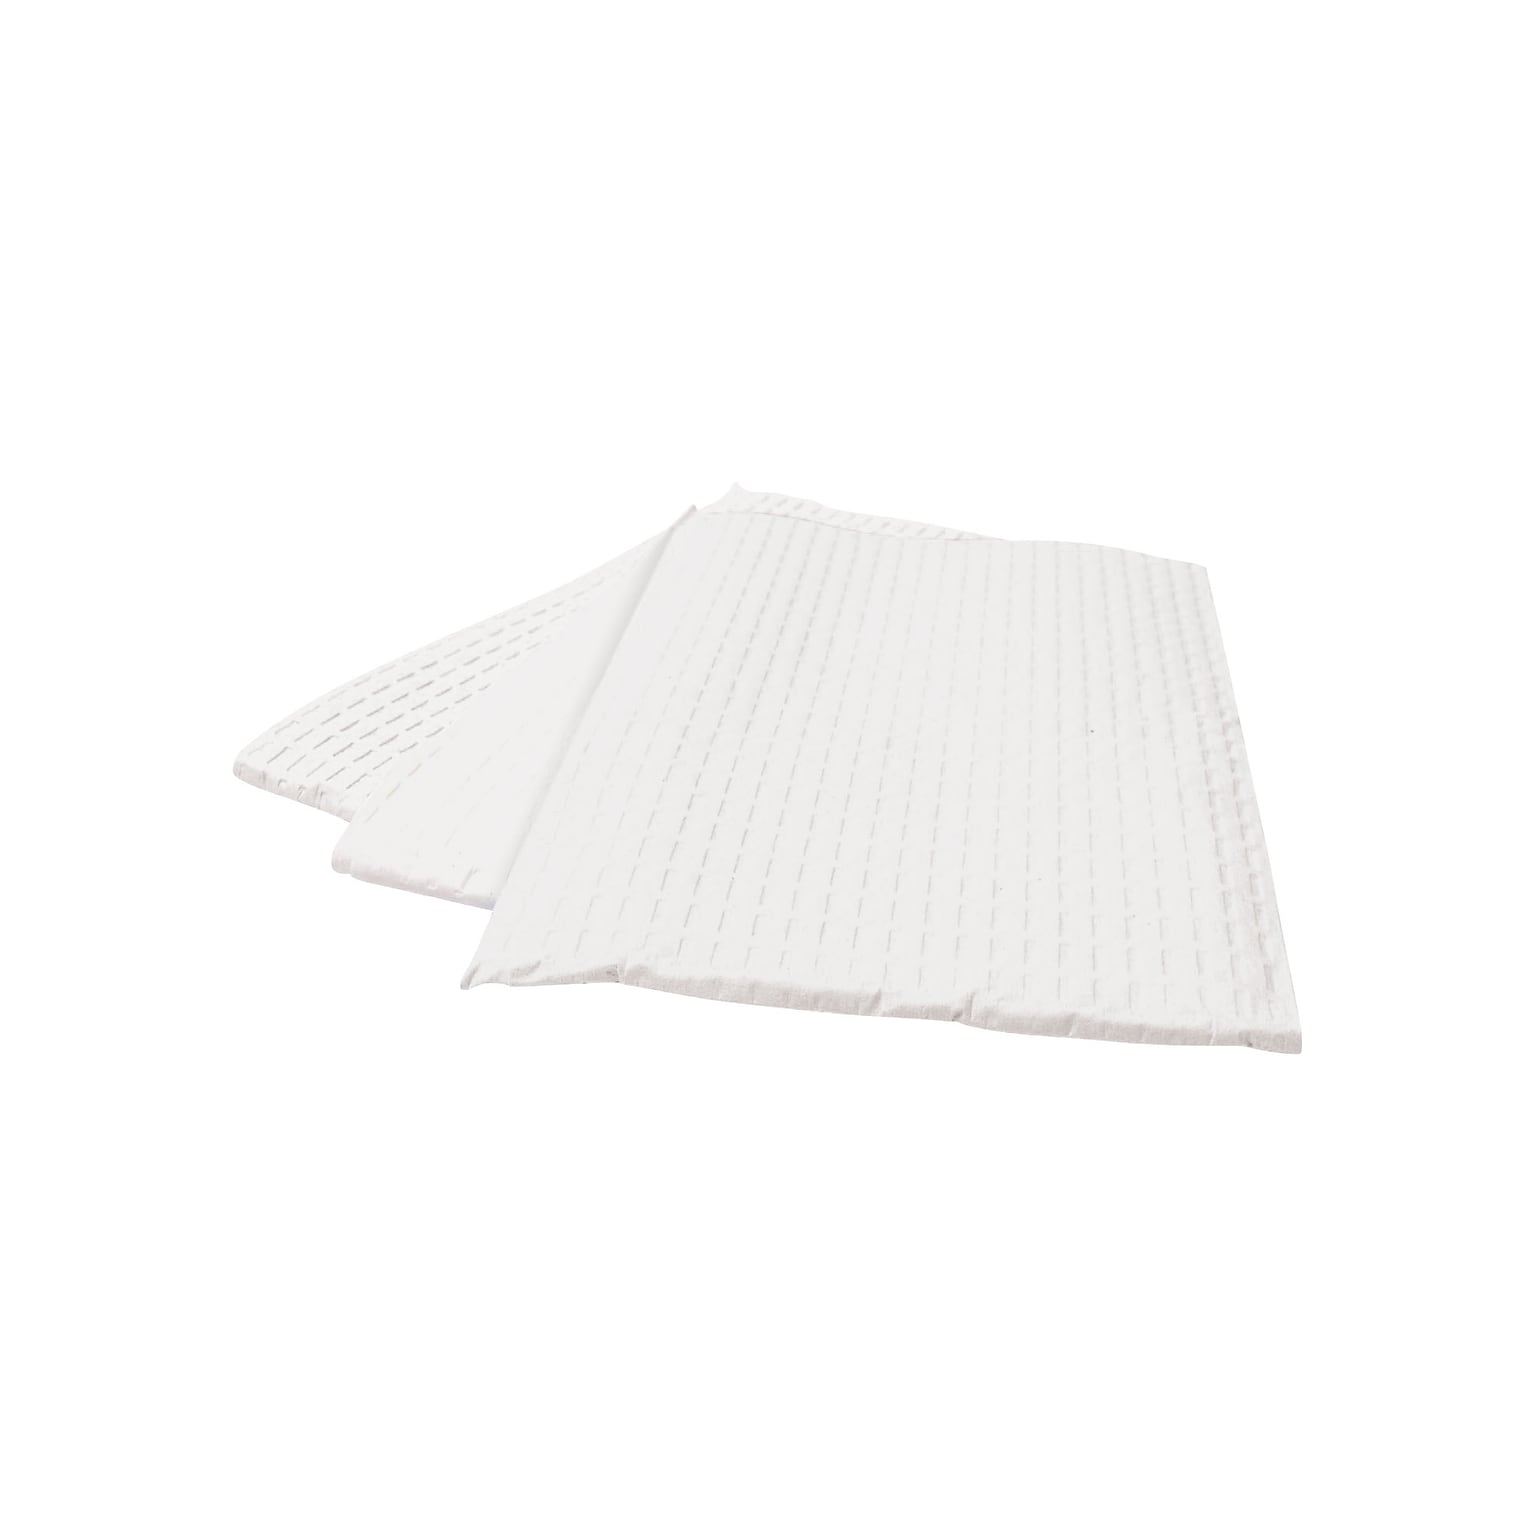 Medical Arts Press® Professional Towels; White, 3 Ply Tissue